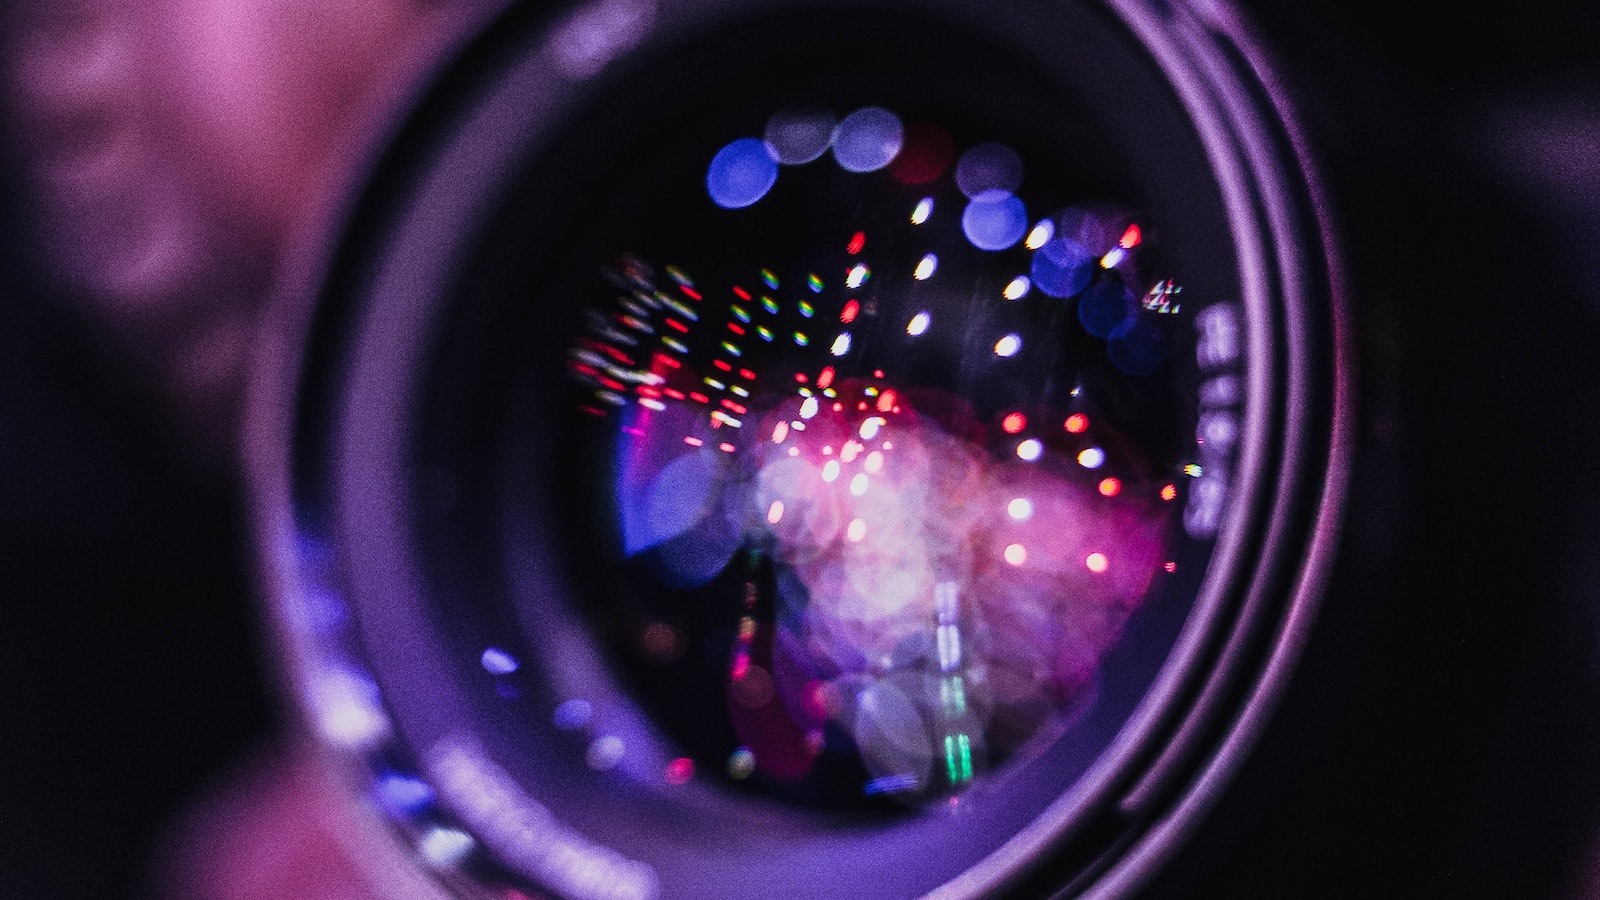 Close-up view of a camera lens focusing on city lights.